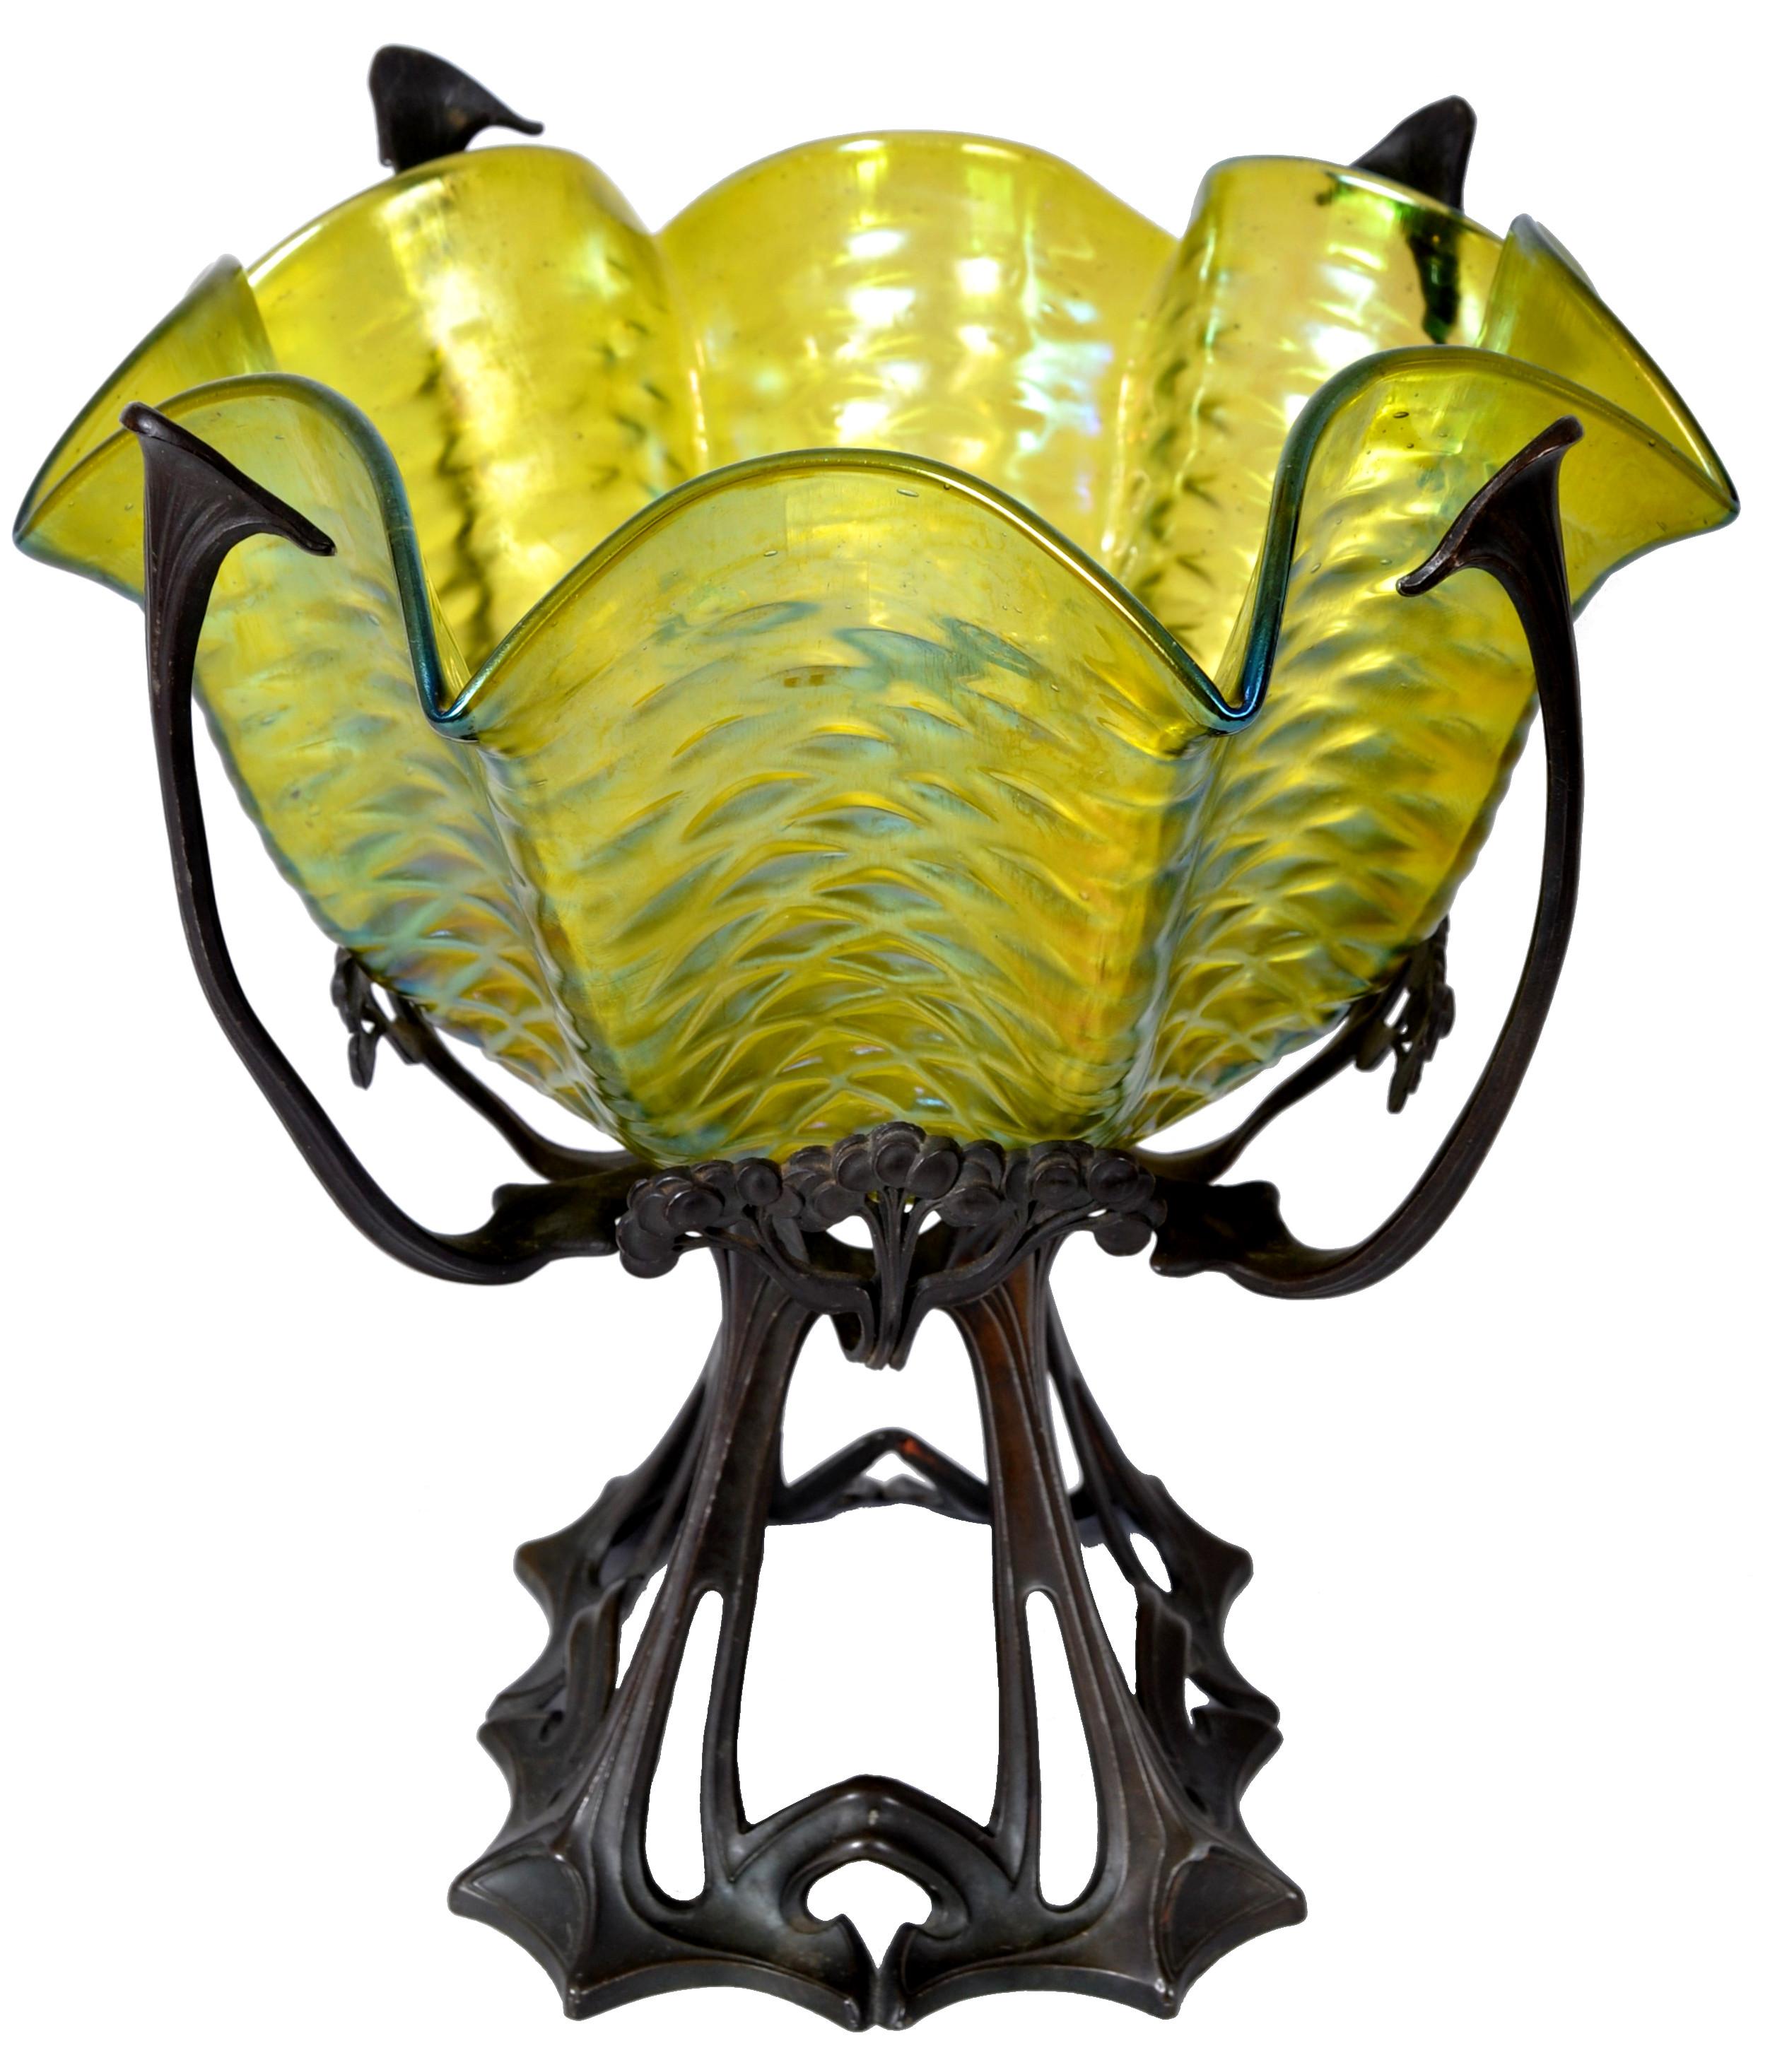 A good and large hand blown Loetz glass bowl with bronze stand circa 1900. The hand-blown chartreuse colored iridescent glass bowl of wavy octagonal form and having a textured 'trailed' glass design. The bowl is housed in the original bronze metal